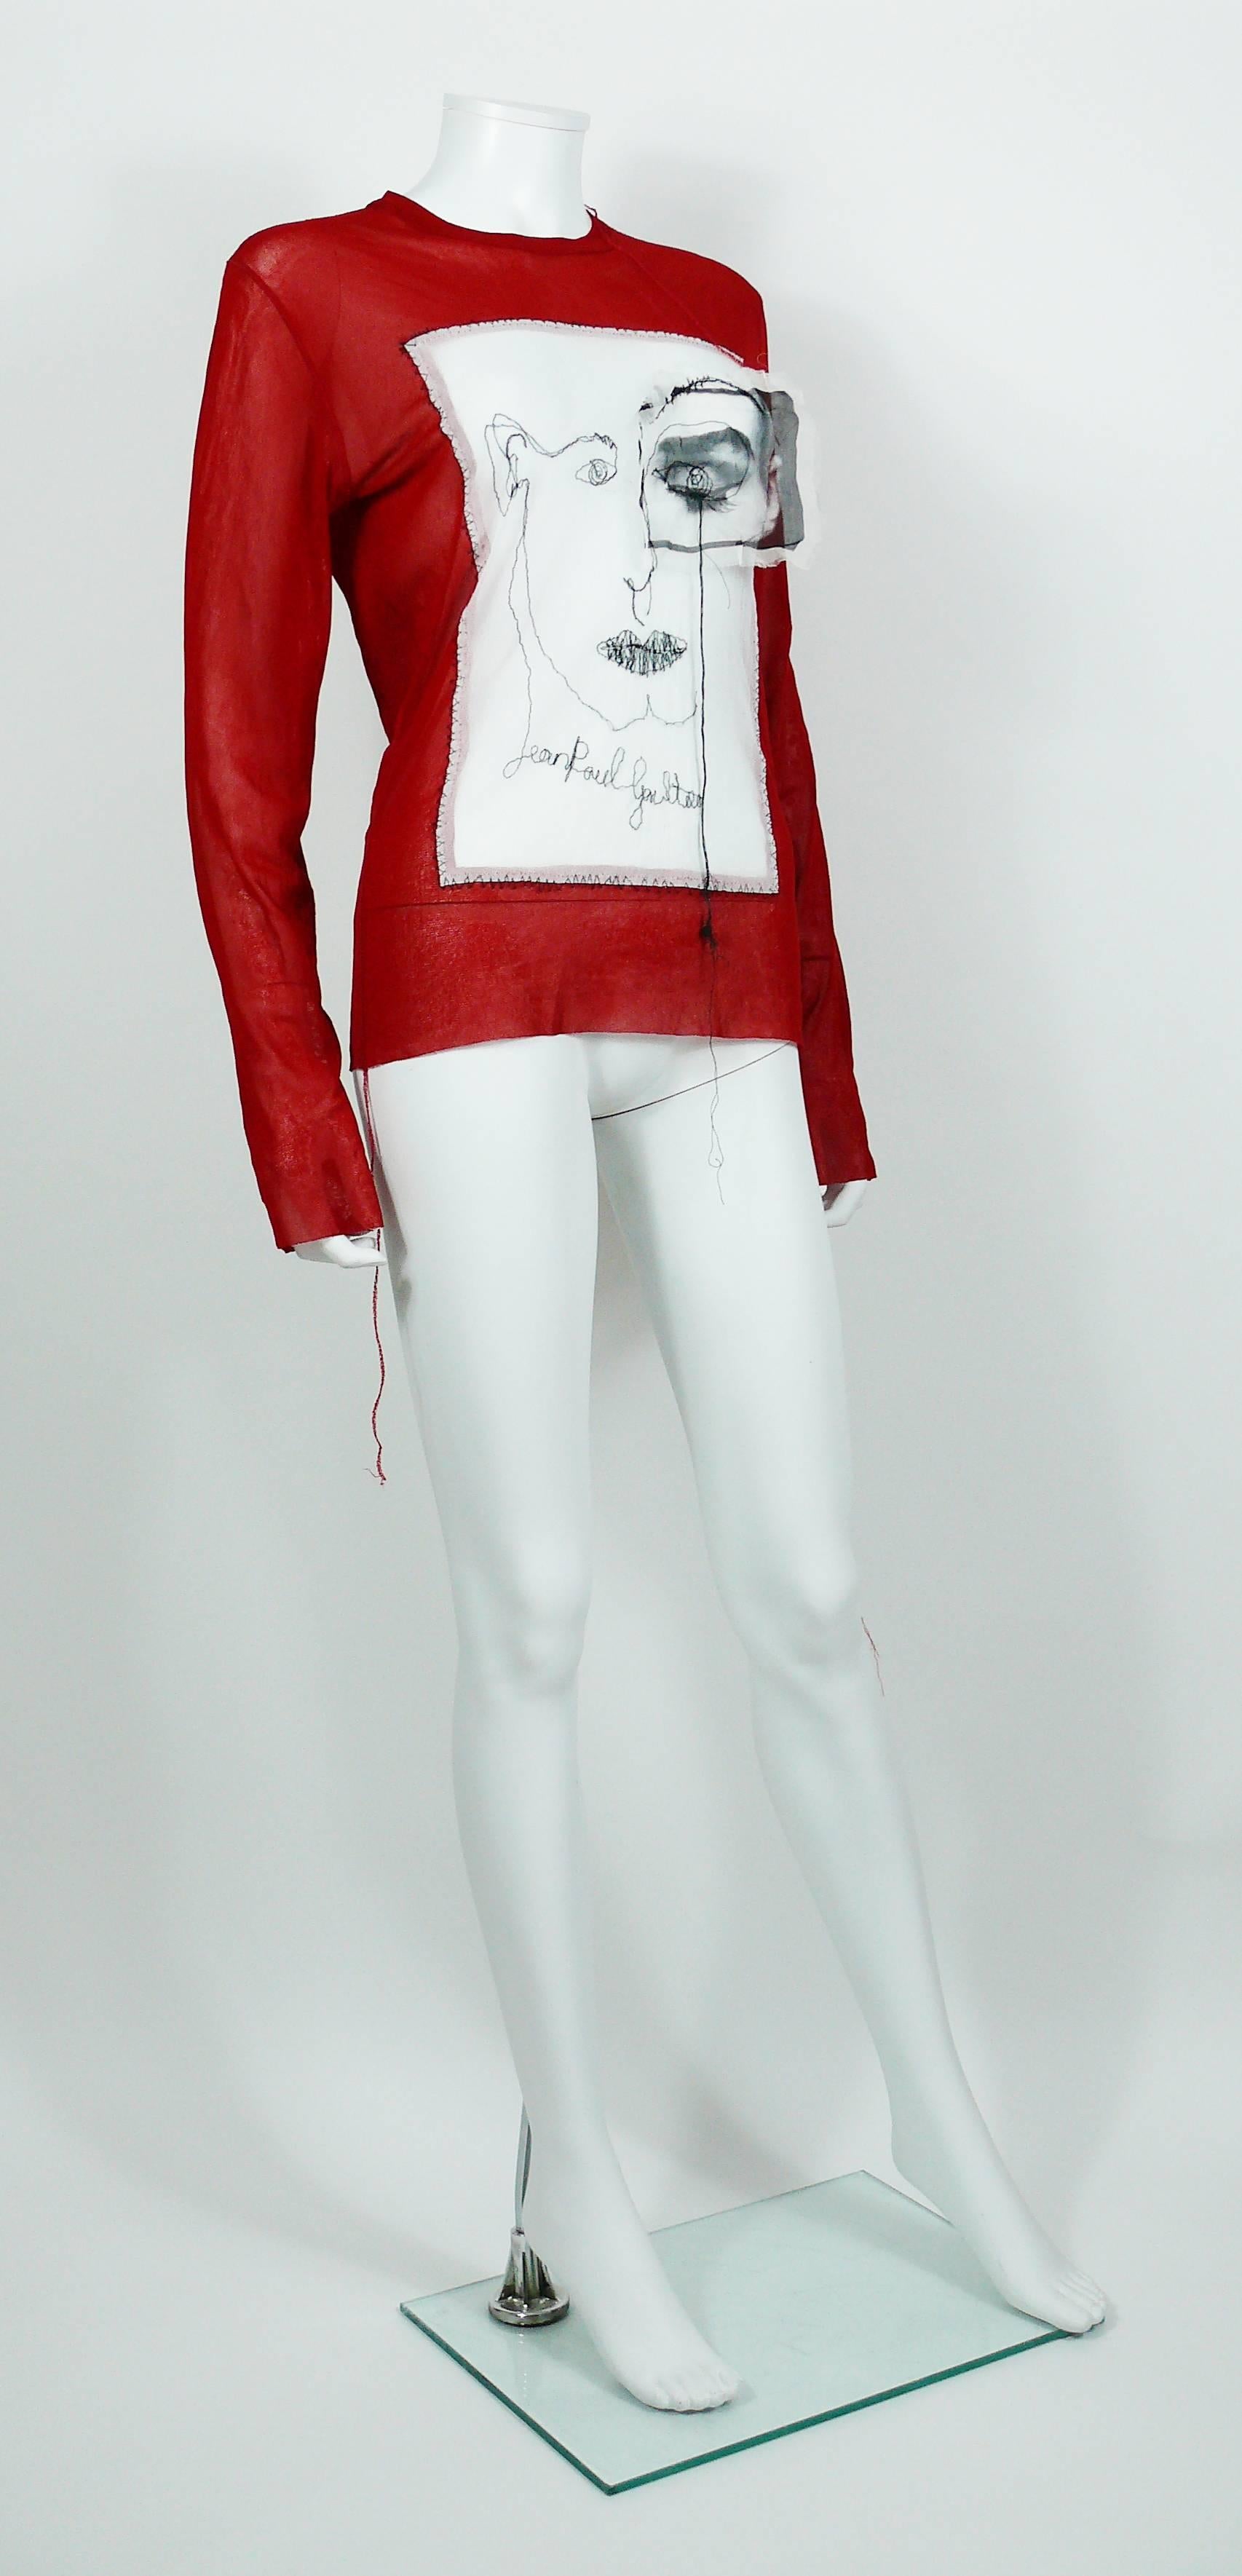 JEAN PAUL GAULTIER men's red sheer mesh top with embroidered portrait and eye applique.

This stretchy mesh nylon top is embroidered with black JEAN PAUL GAULTIER cursive signature.

Label reads JEAN PAUL GAULTIER Maille Homme Made in